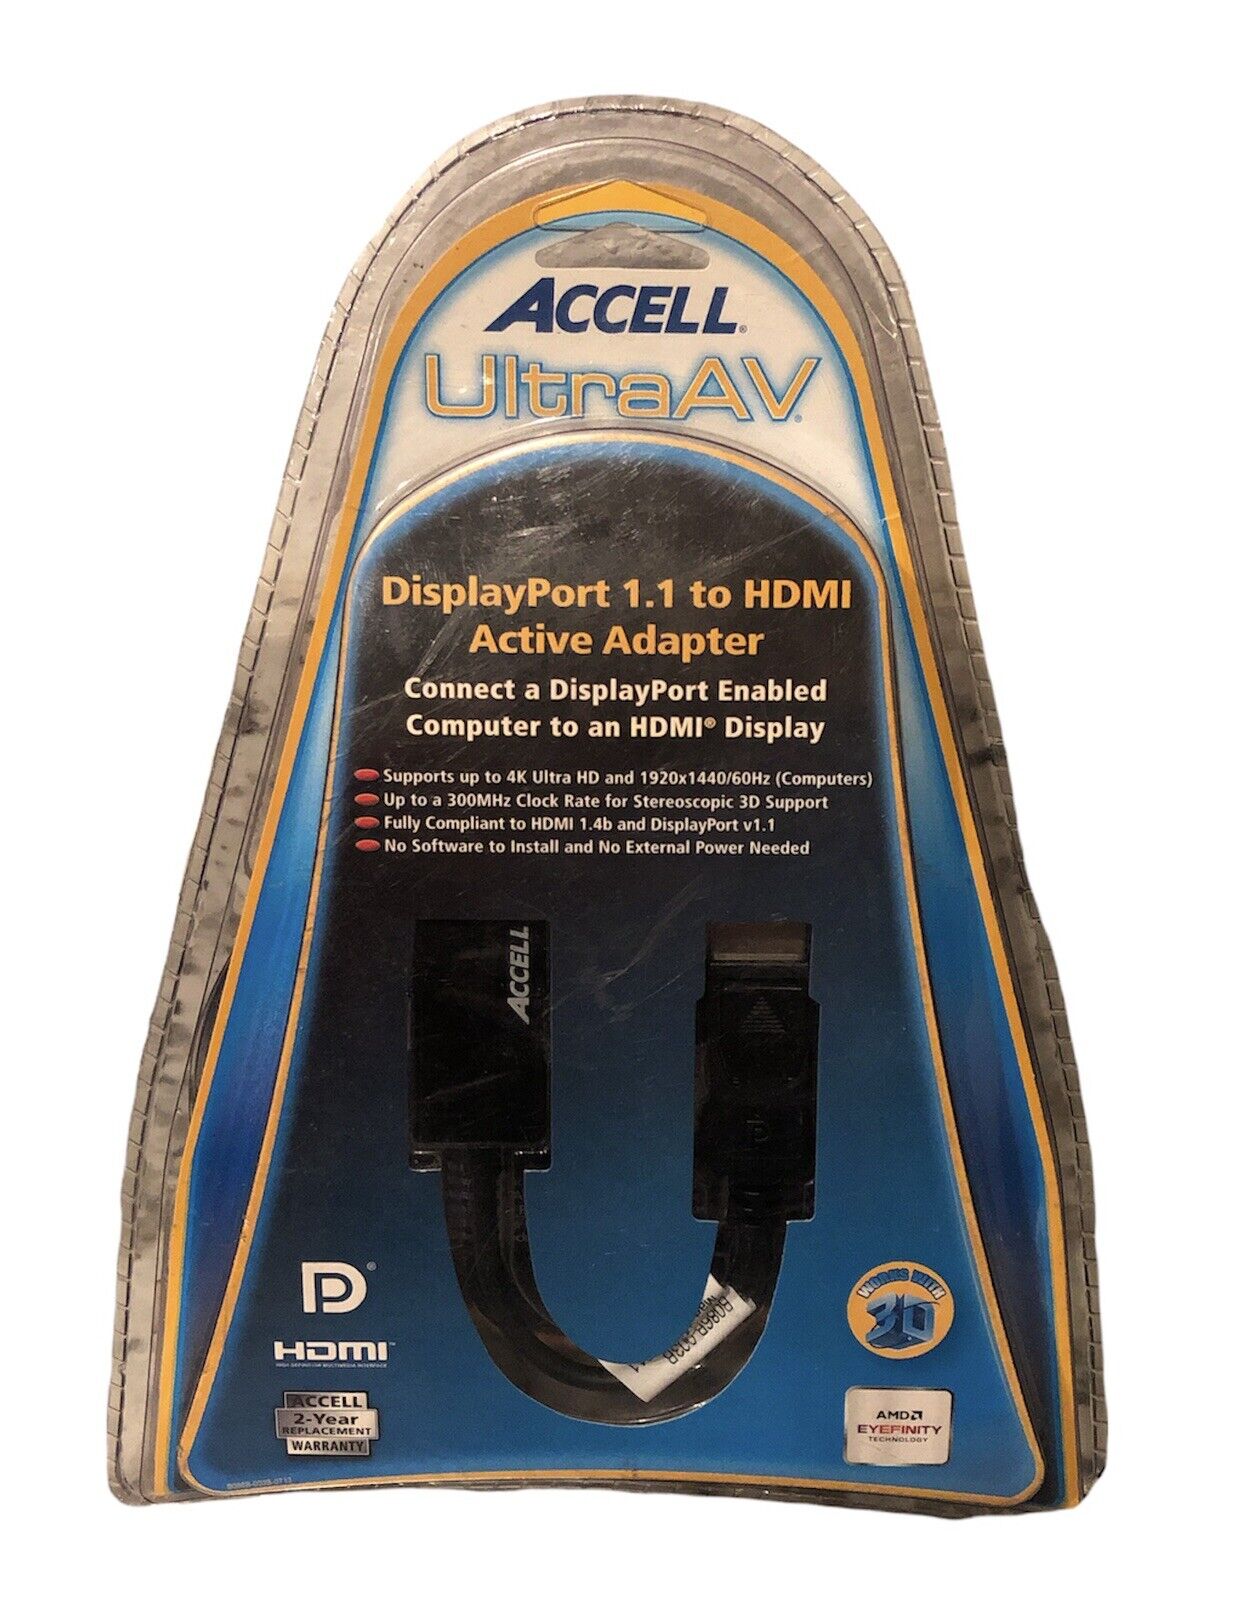 Display Port to HDMI, ACCELL UltraAV, Active Adapter